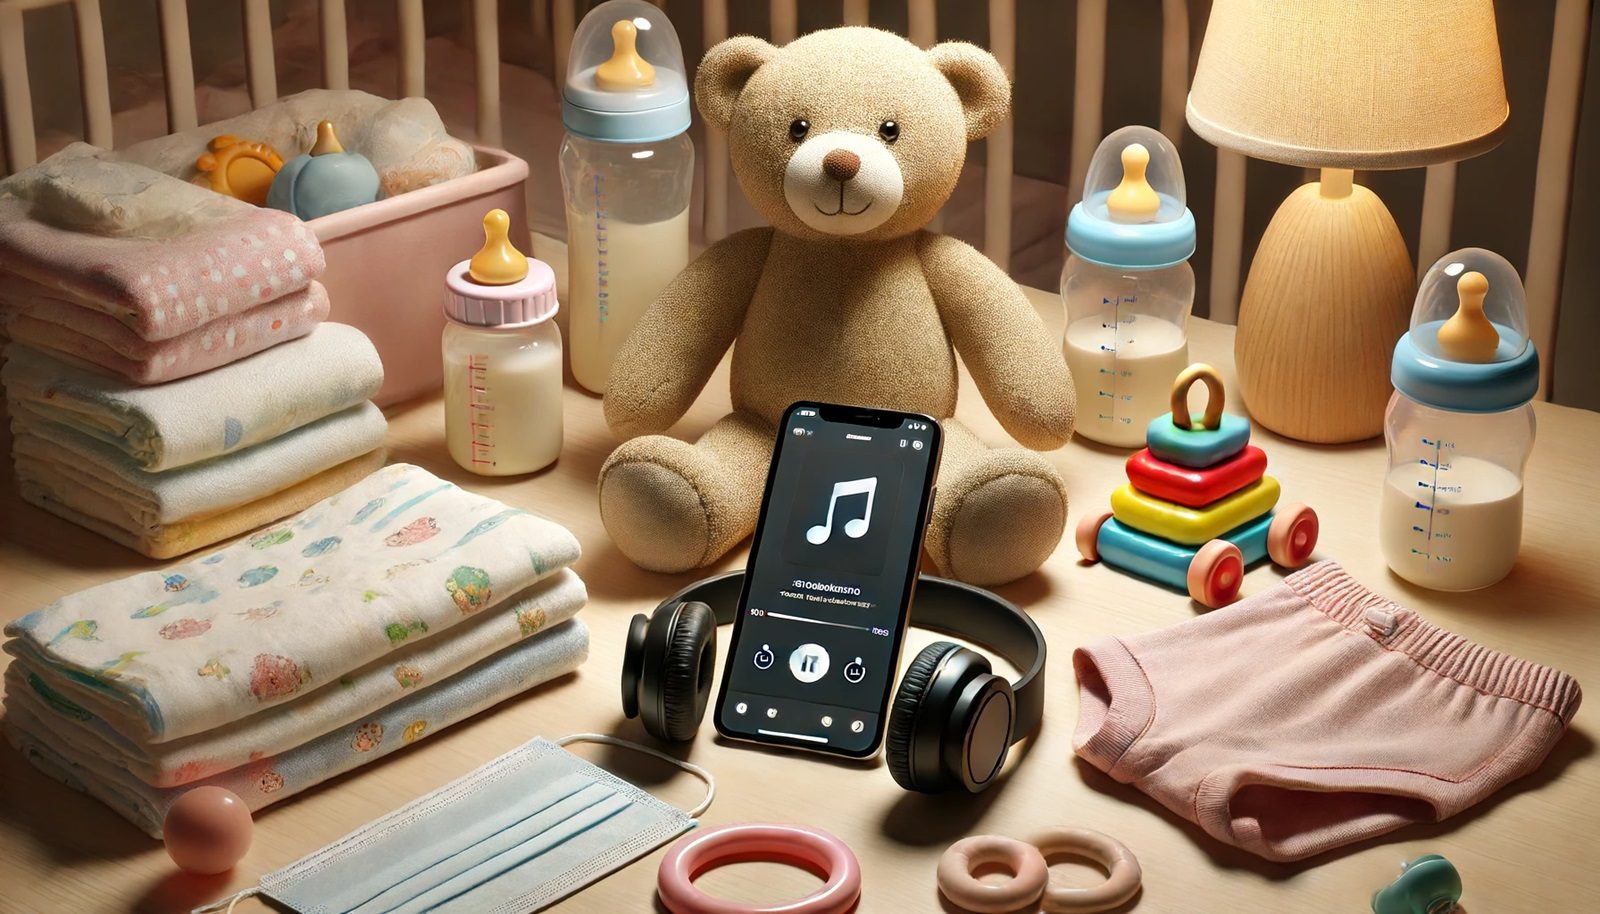 DALL·E 2024 06 16 12.20.22 A photorealistic image of a smartphone and headphones placed among baby items like diapers toys and baby bottles. The setting is a cozy and tidy nur